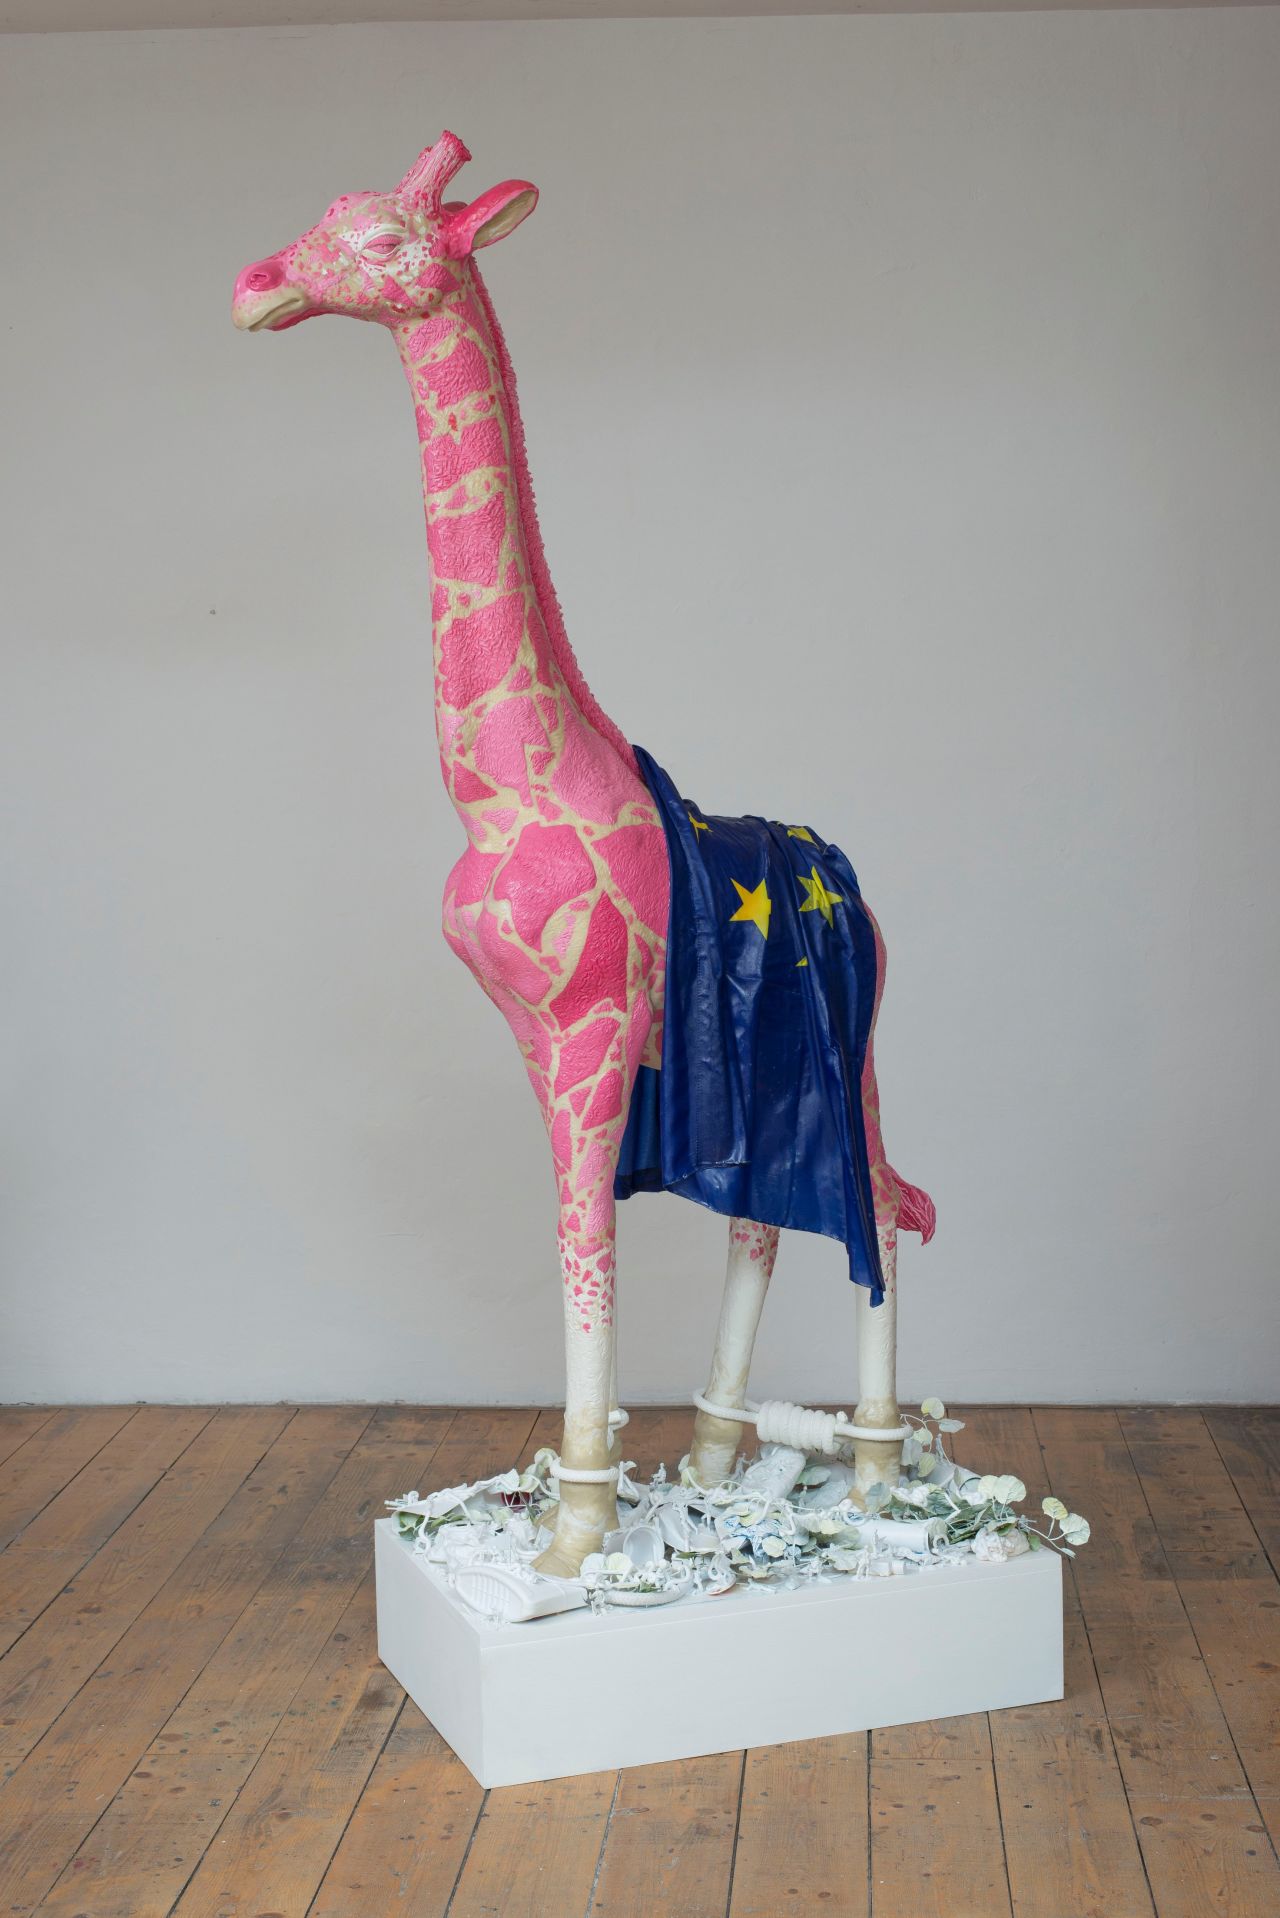 Inspired by an African tale, Savini's giraffe satirizes the gulf between EU powerbrokers in Brussels and the rest of the population.